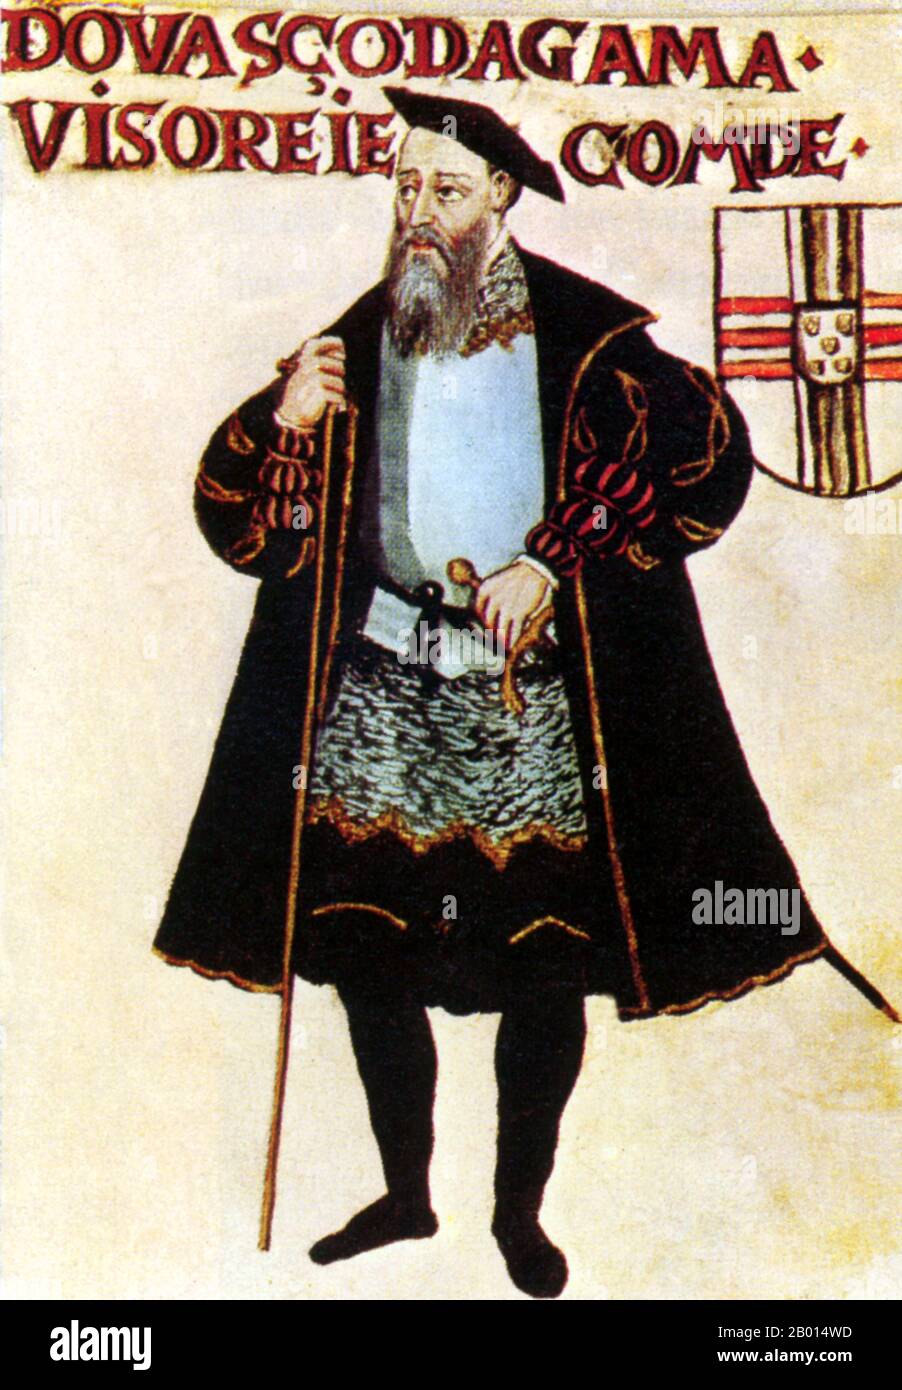 Portugal/India: Vasco da Gama (1460/1469 – 24 December 1524), Portuguese explorer and navigator, with his coat of arms. Portrait painting, c. 1565.  Vasco da Gama was a Portuguese explorer, one of the most successful in the Age of Discovery, and the commander of the first ships to sail directly from Europe to India. Under the reign of King Manuel I, Portugal discovered Brazil in 1500. Meanwhile, da Gama set sail from Lisbon on July 8, 1497, with a fleet of four ships and 170 men. He sailed around the Cape of Good Hope, and finally landed in Calicut, India on May 20, 1498. Stock Photo